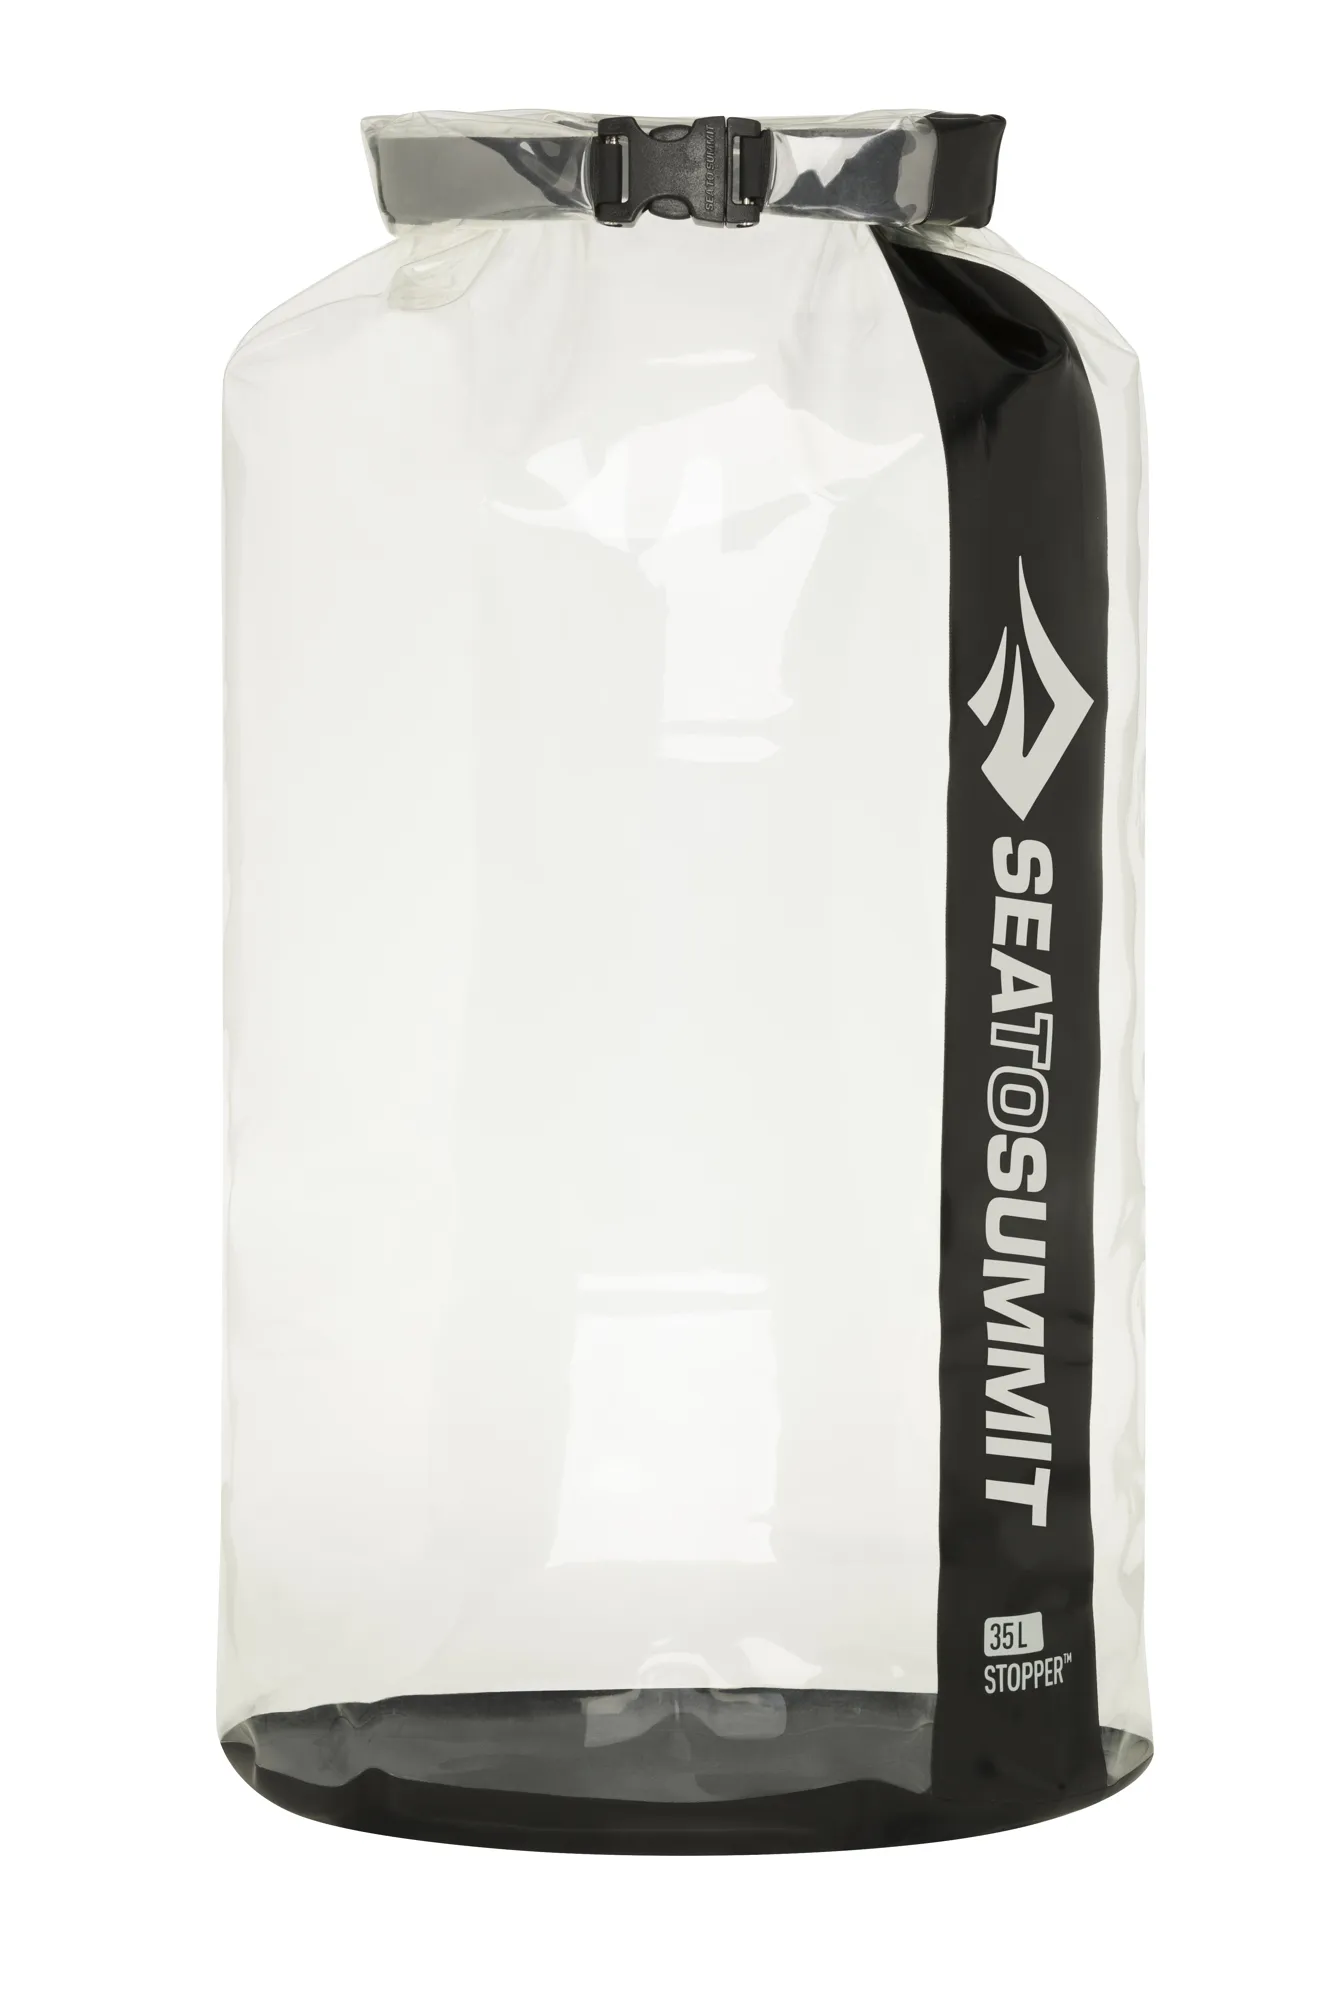 Sea to Summit - Stopper Clear Dry Bag - 35L